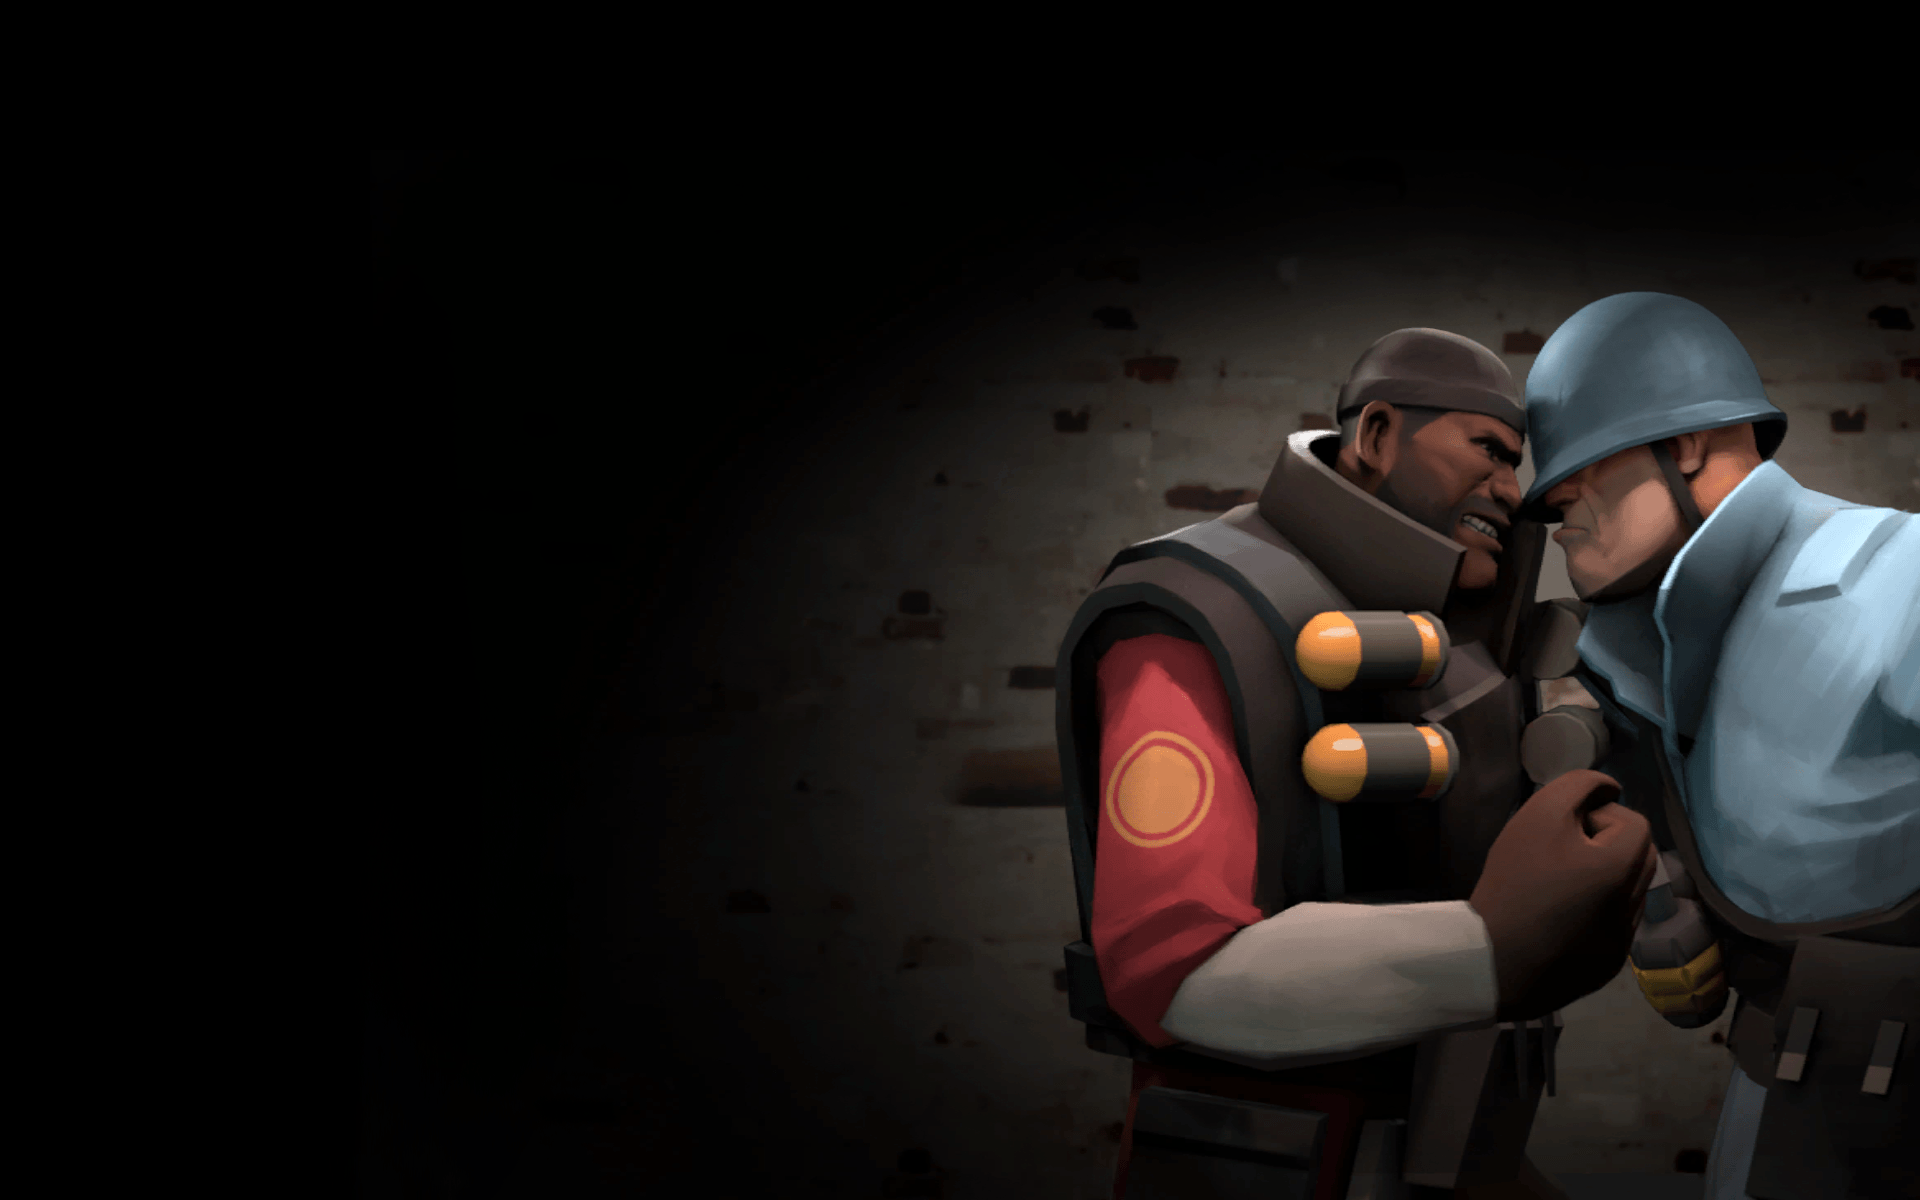 image For > Team Fortress 2 Wallpaper HD 1920x1080